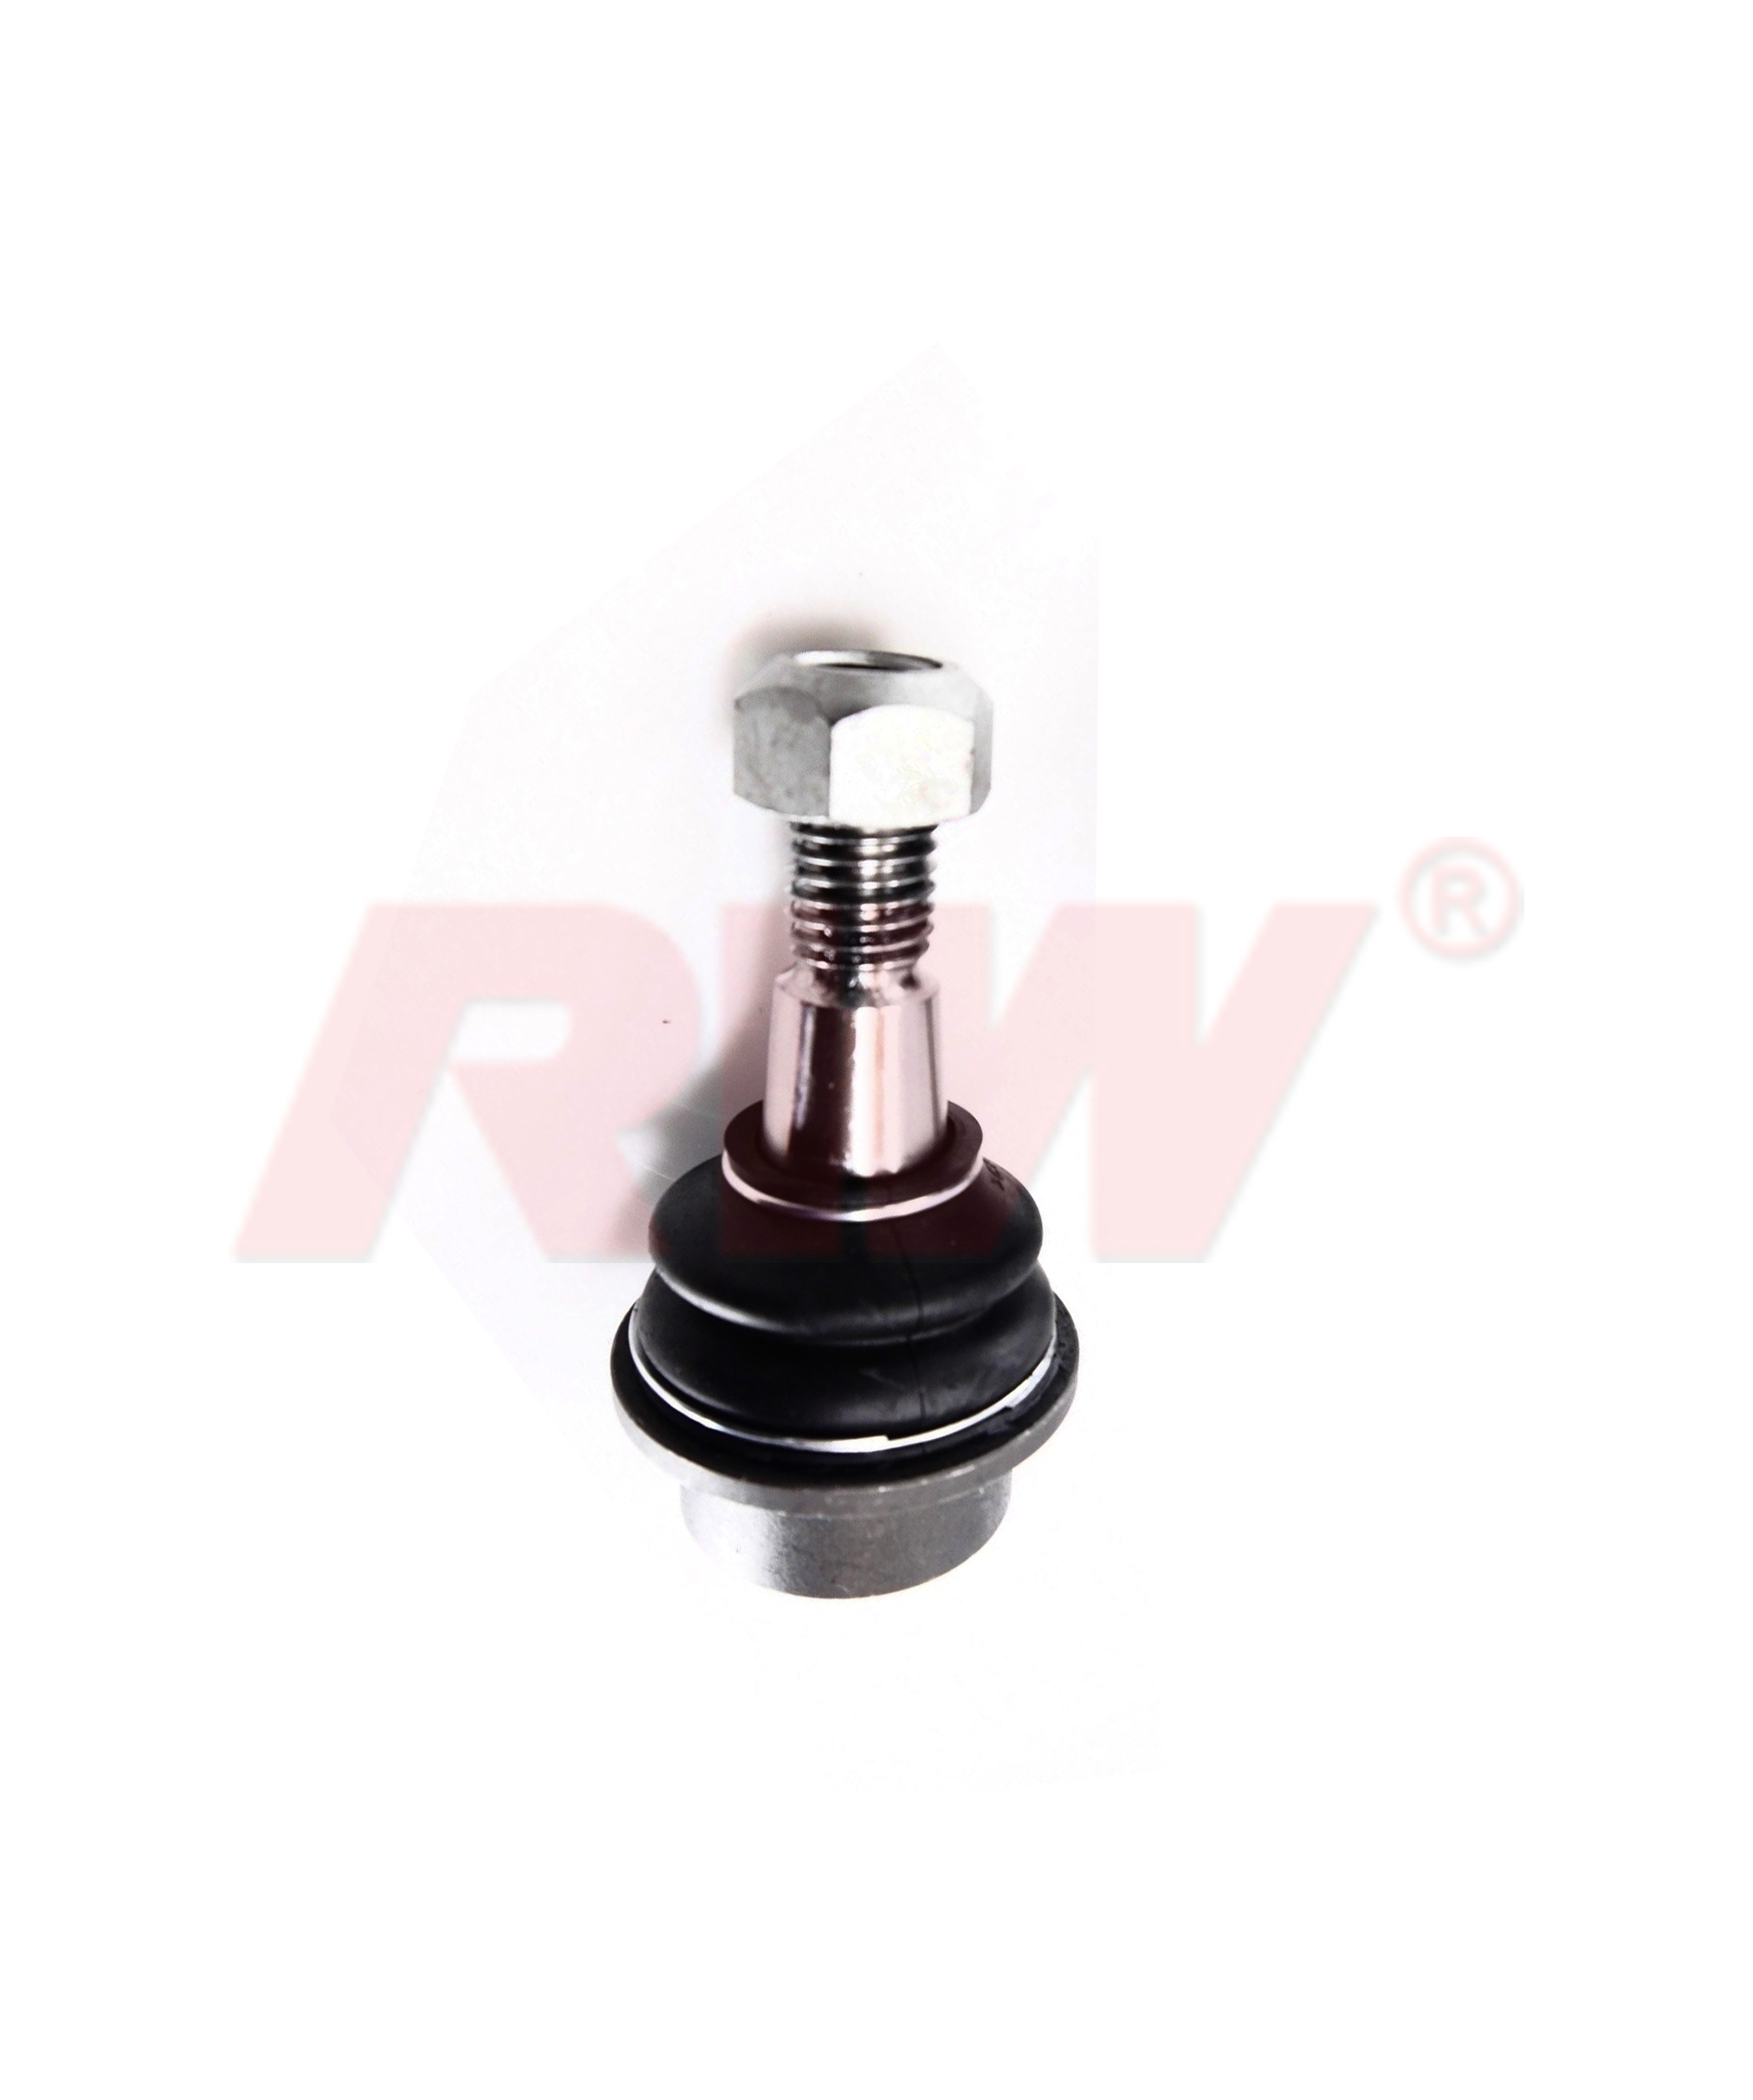 HUMMER H3T 2009 - 2010 Ball Joint